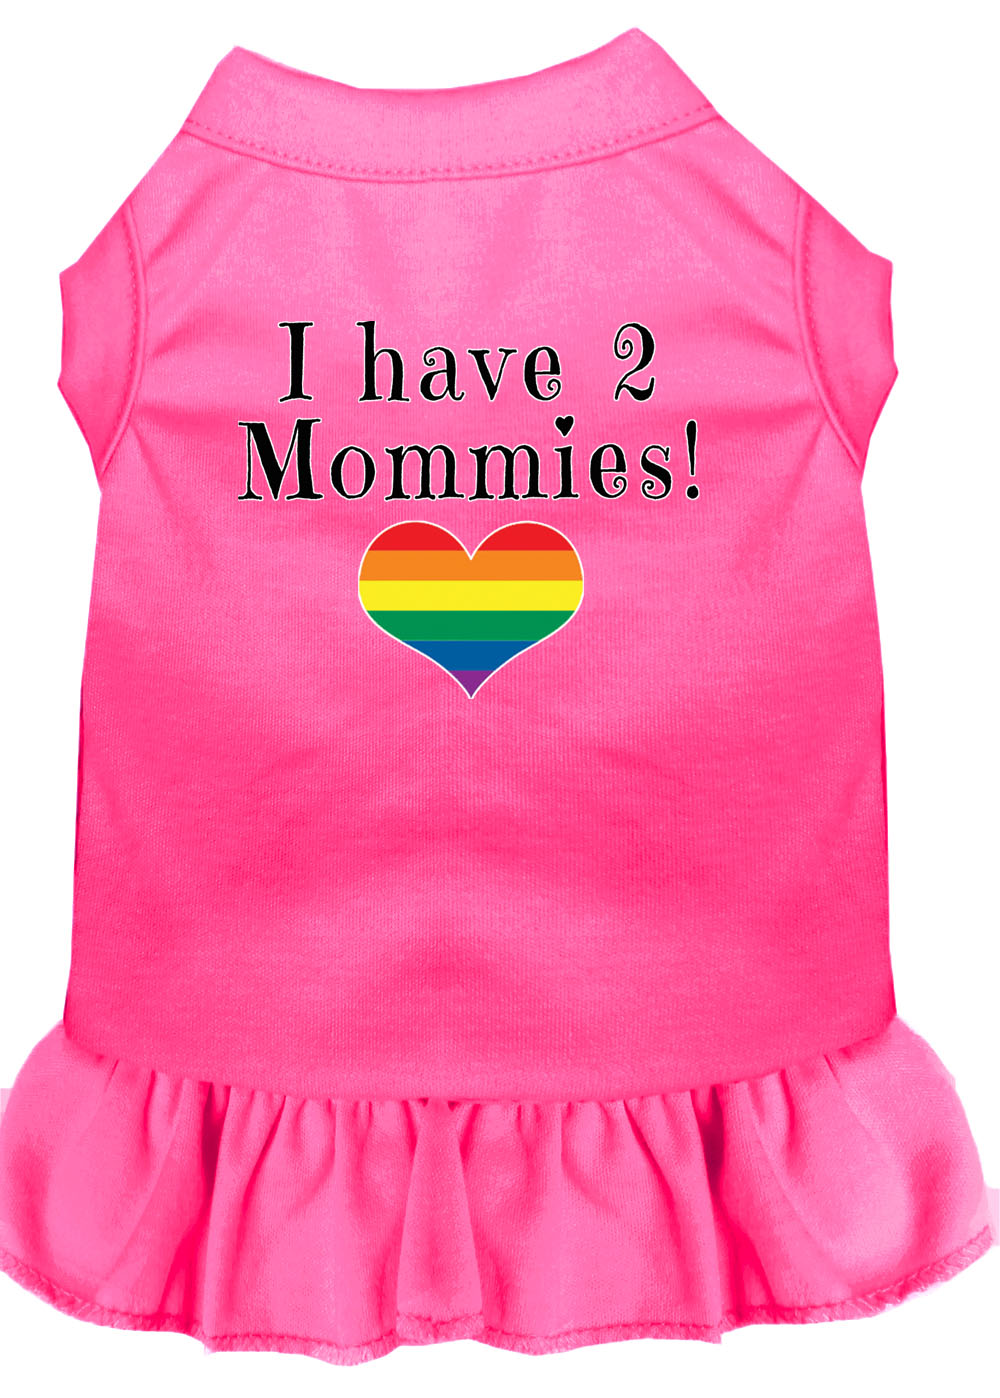 I Have 2 Mommies Screen Print Dog Dress Bright Pink Med